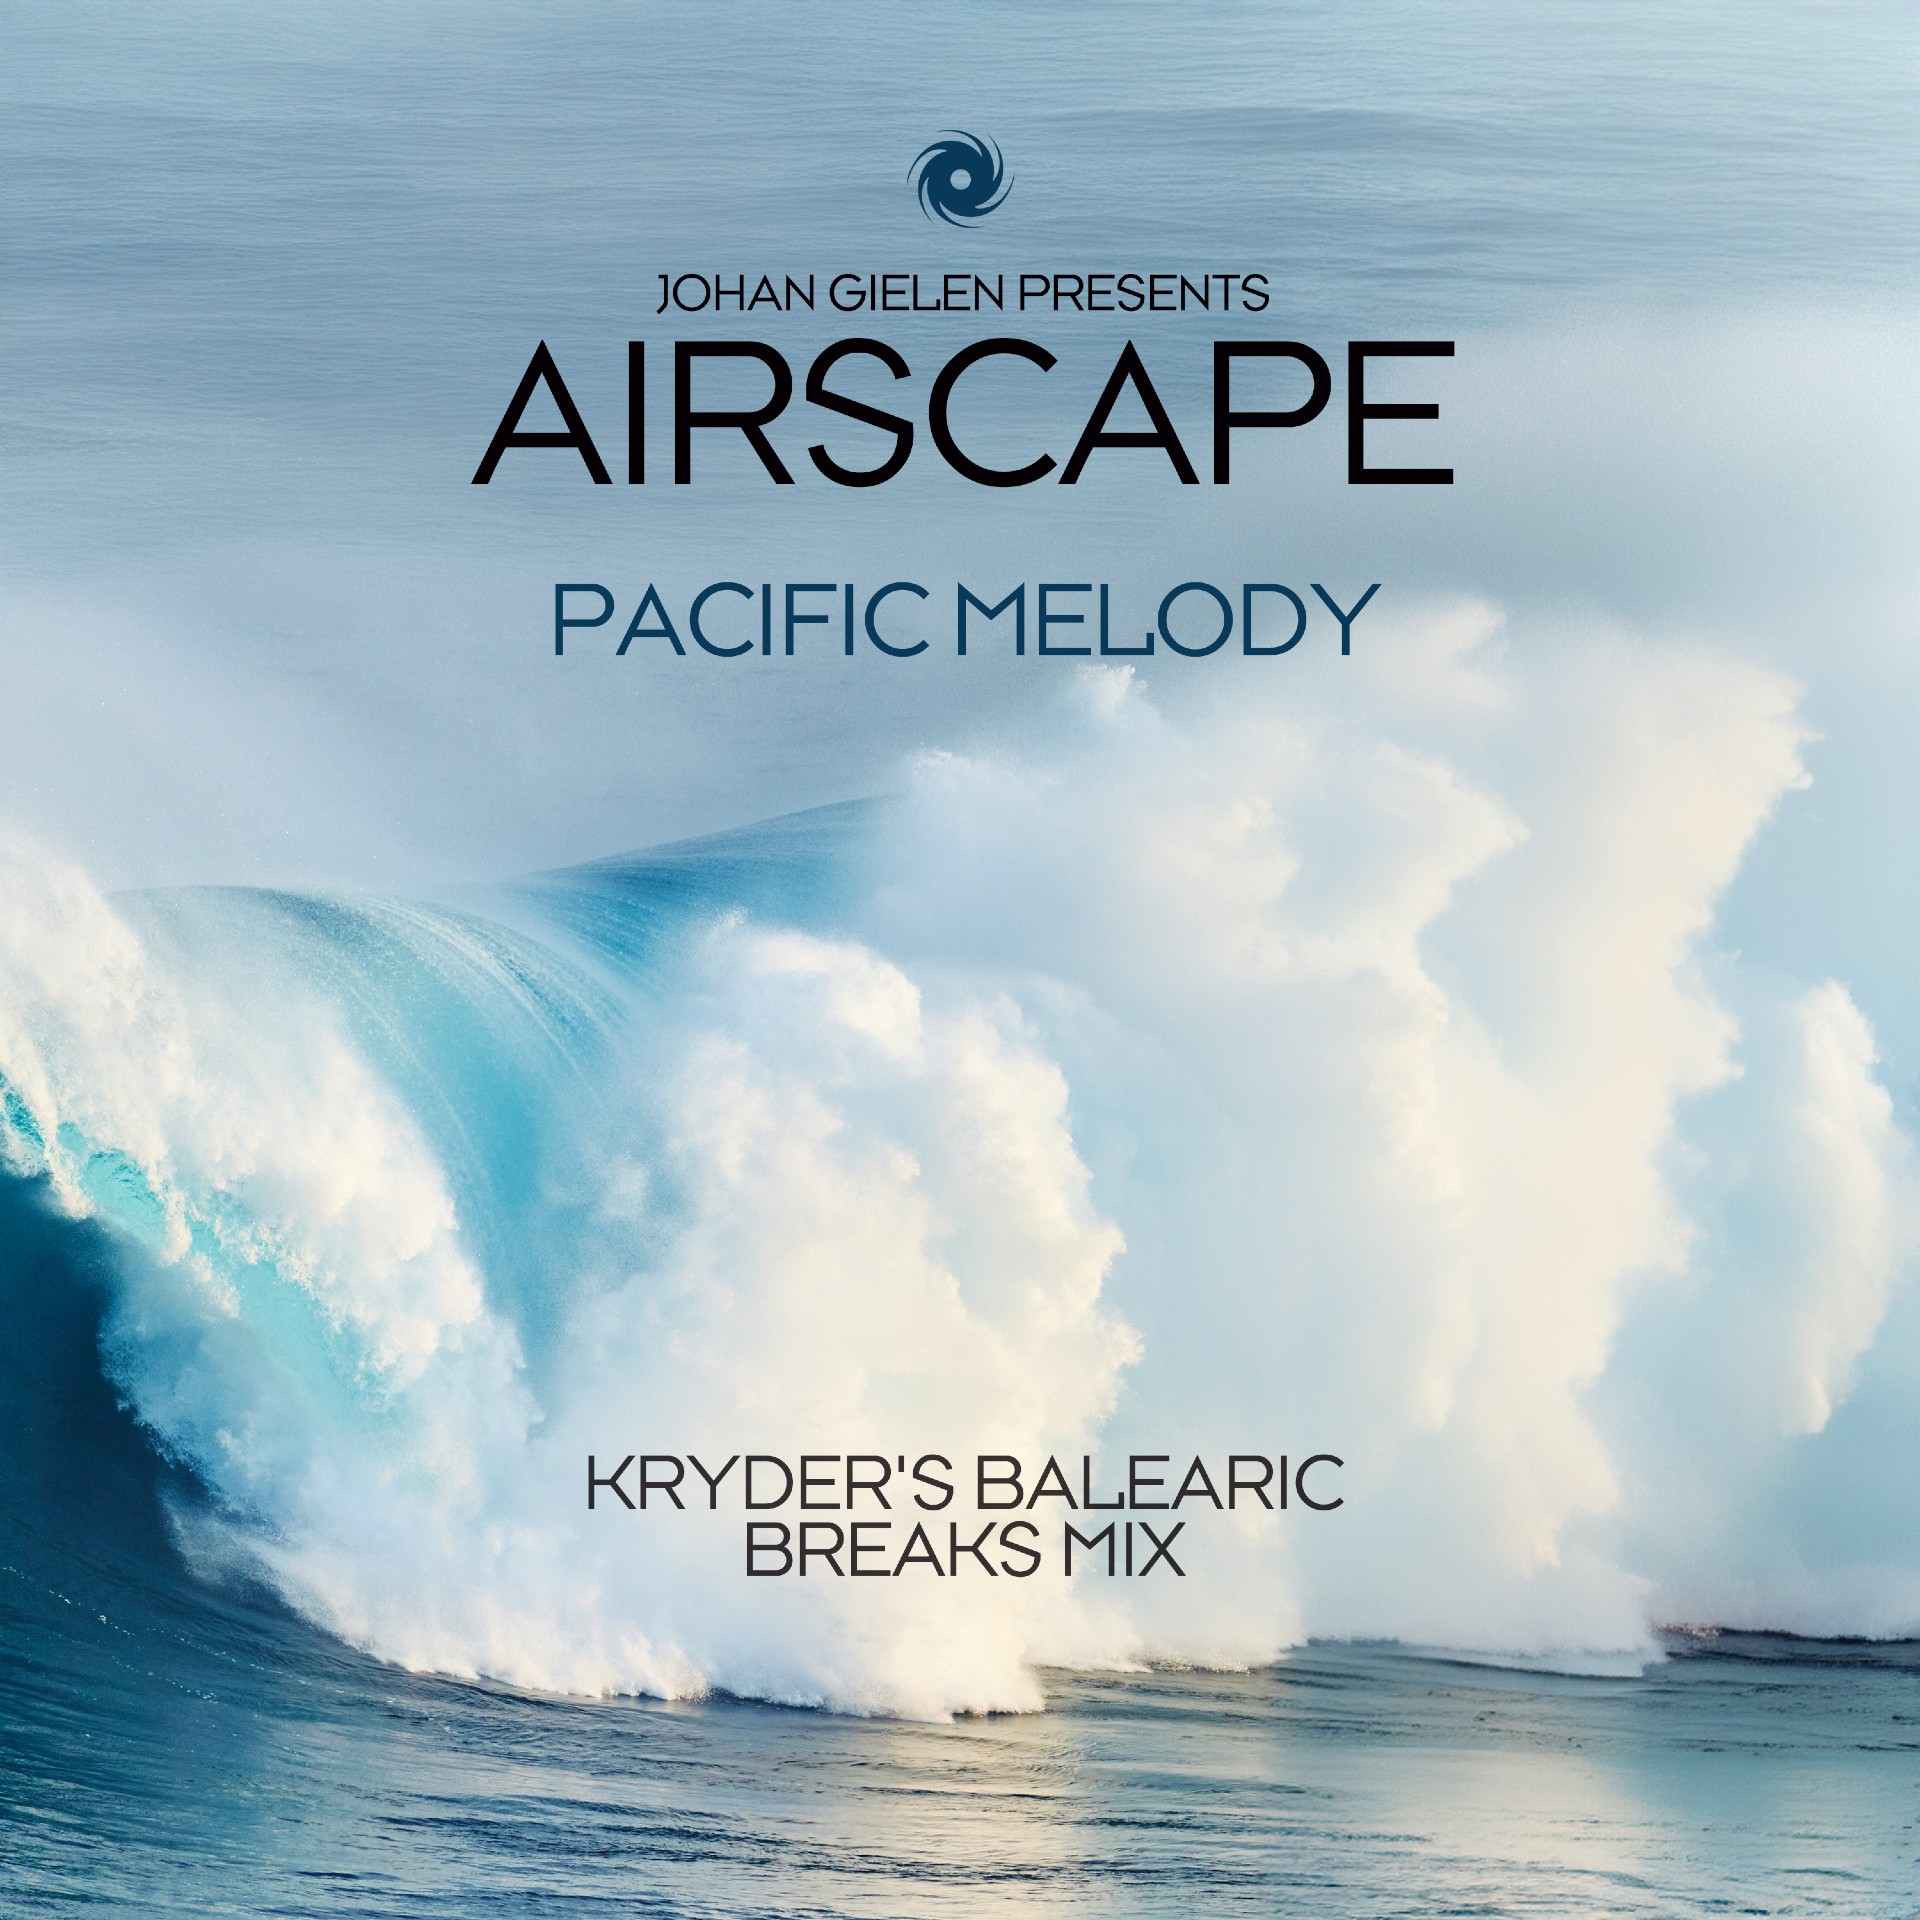 Johan Gielen pres Airscape presents Pacific Melody (Kryder's Balearic Breaks Mix) on Black Hole Recordings